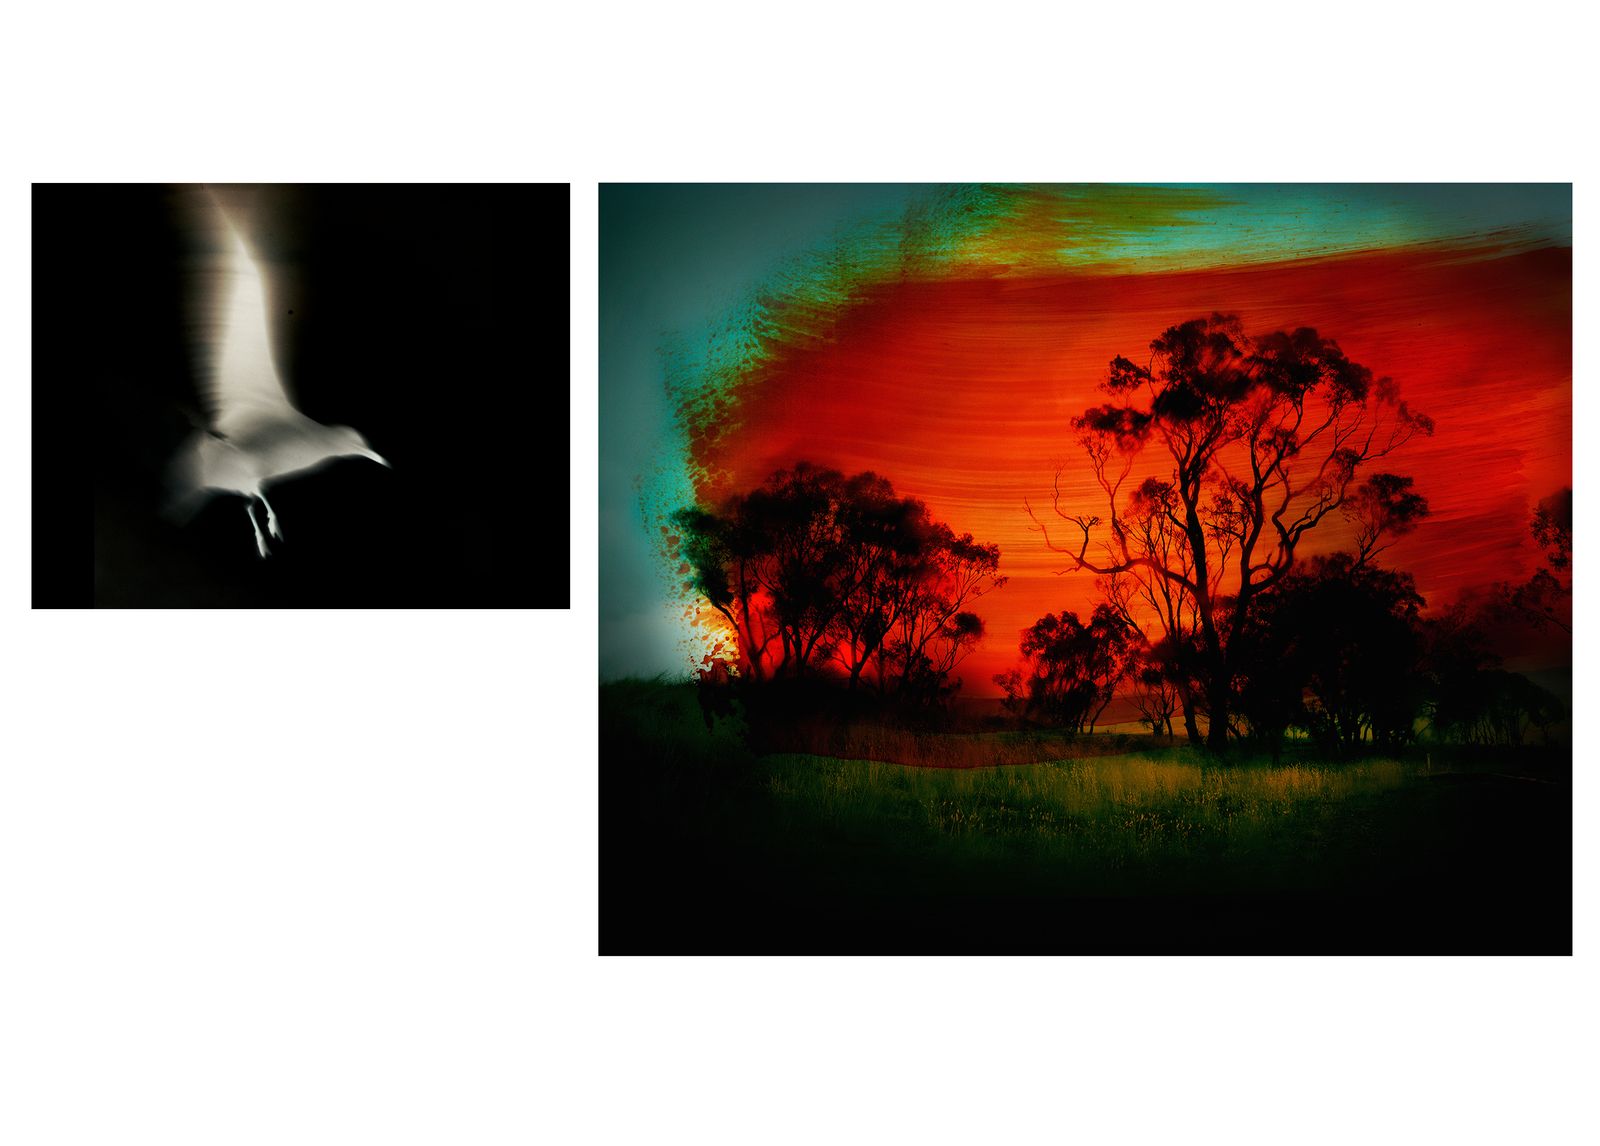 © Aletheia Casey - Image on left: A bird flies over a burnt landscape.Image on right: A reimagined landscape, following a wildfire.